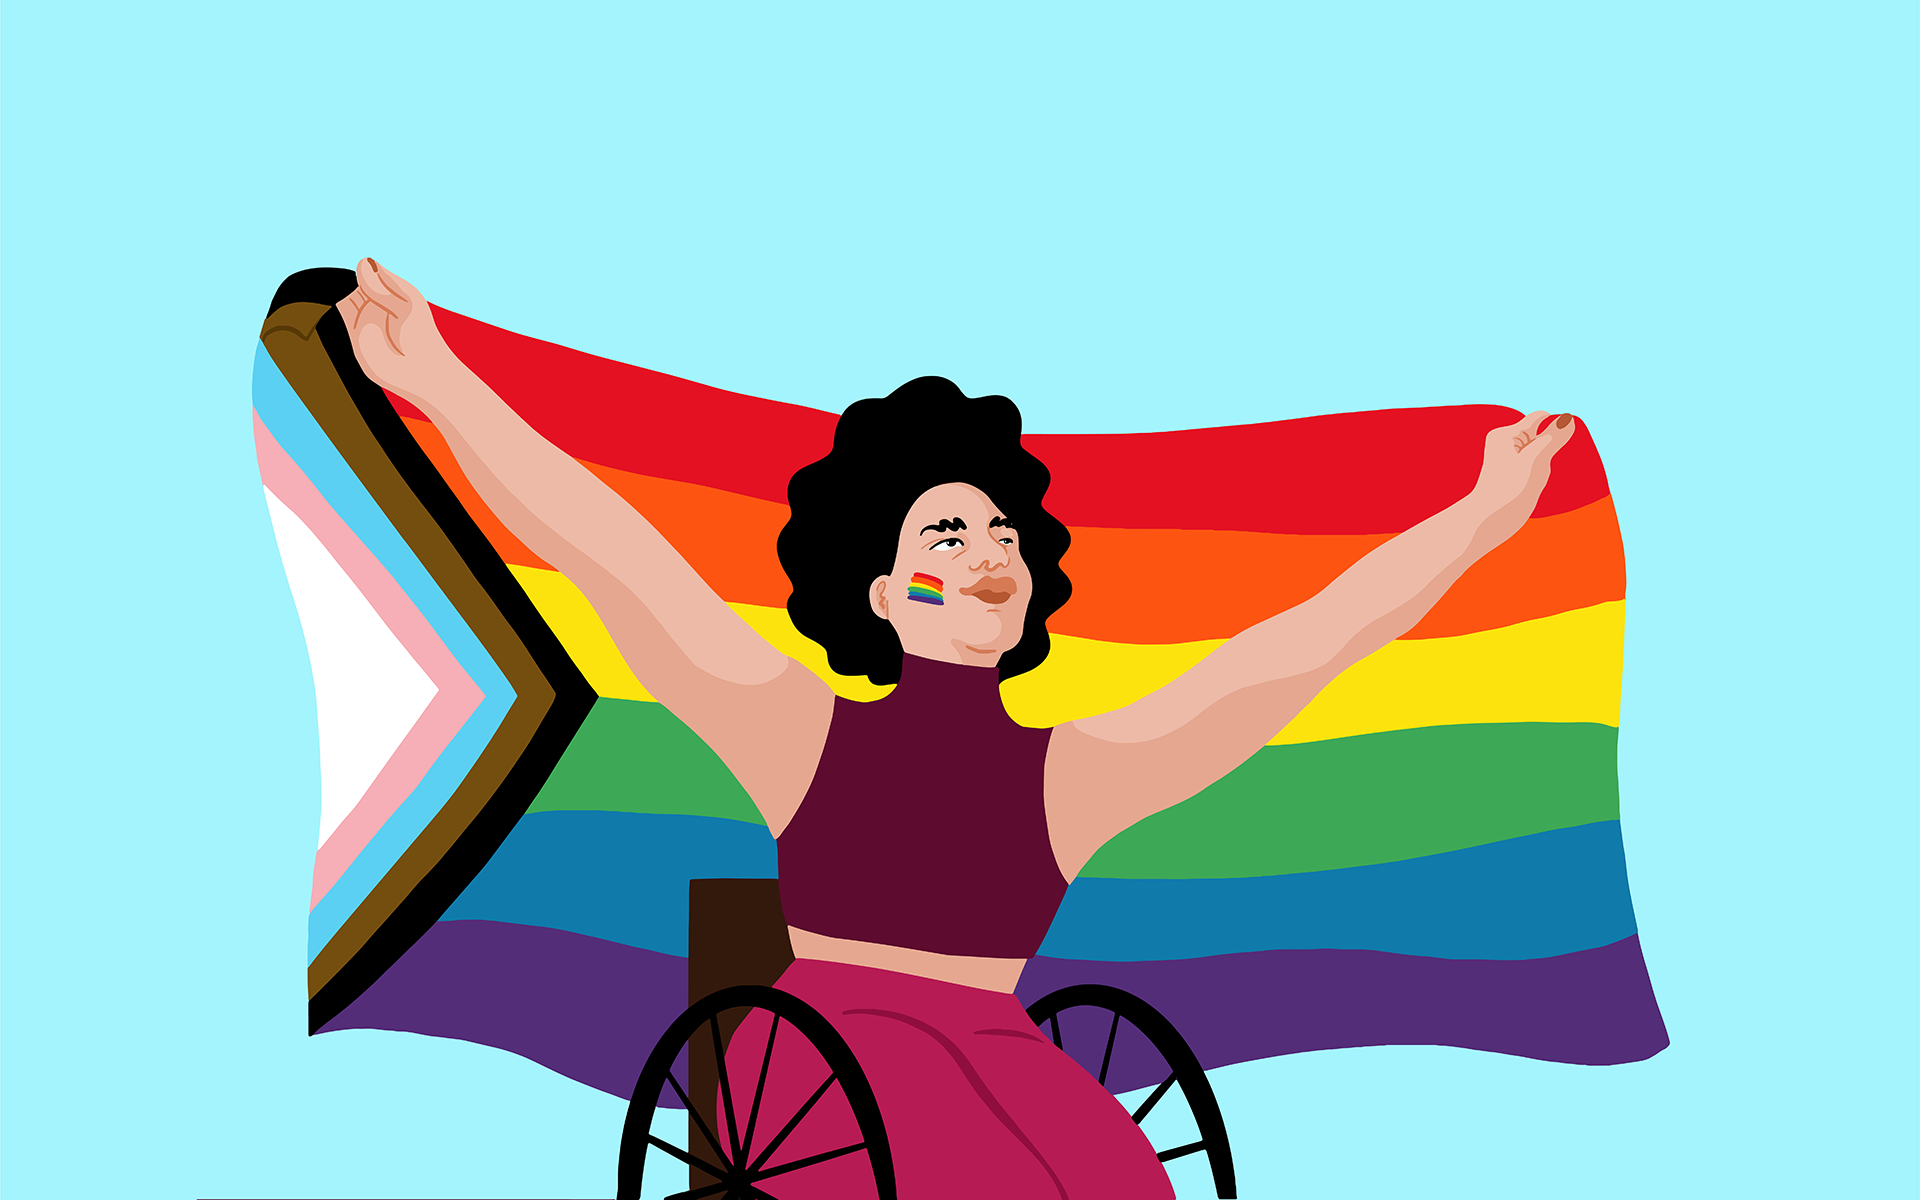 Illustration of a person using a wheelchair holding up the Philly Pride flag behind them over a light blue background. The person has short, black, curly hair, their skin is light, and they have a small rainbow on each of their cheeks.